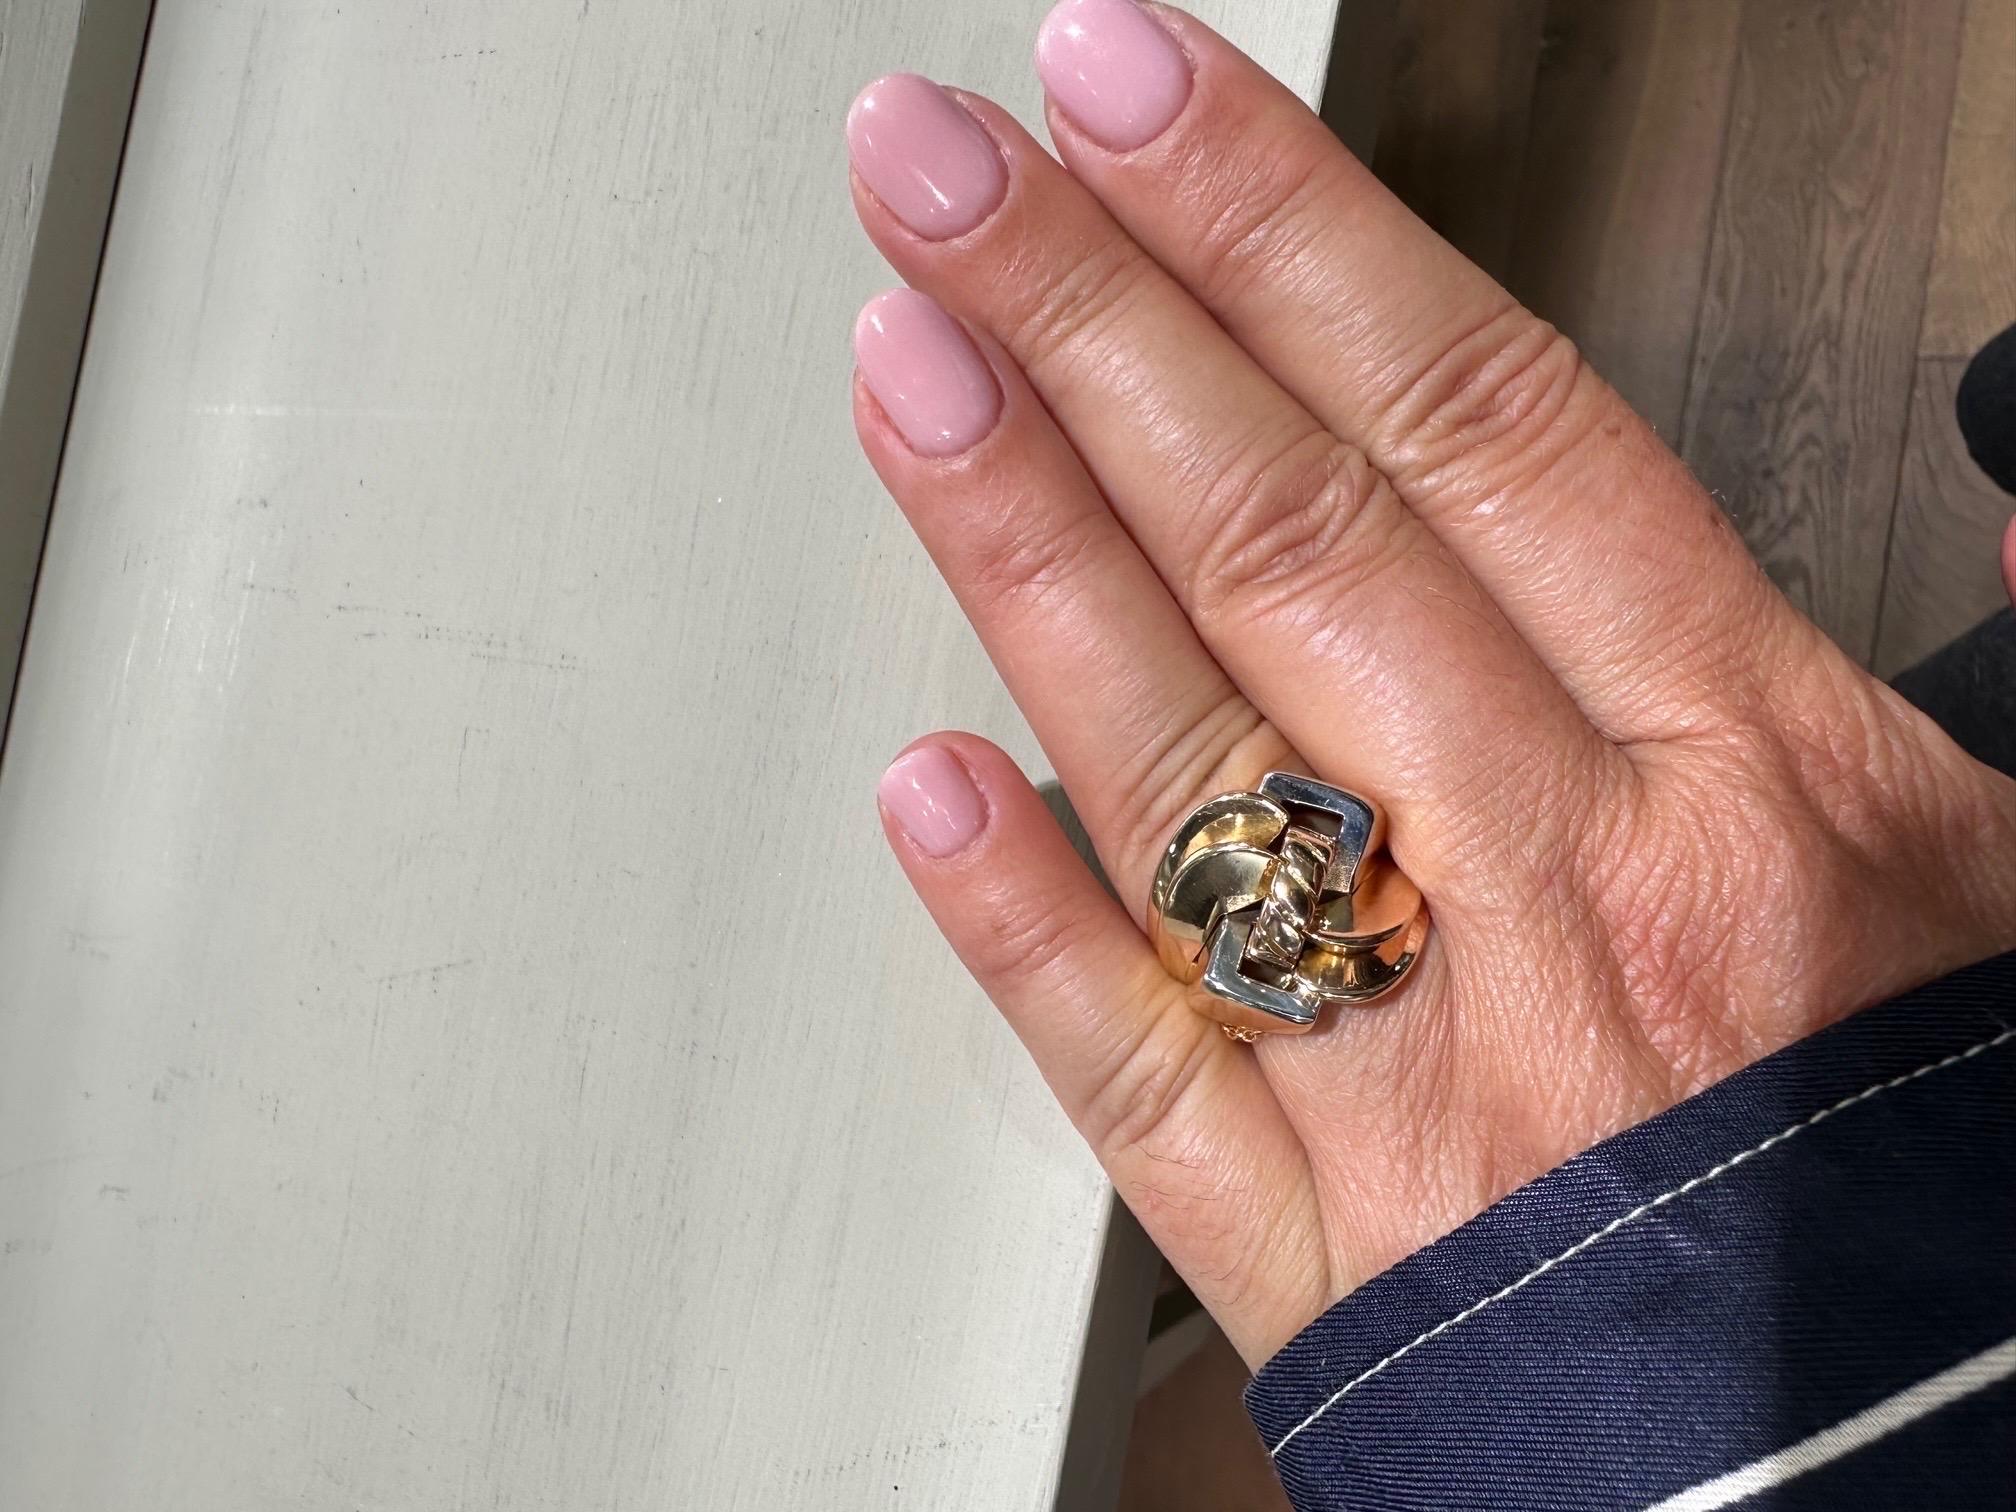 Discover this beautiful French tank ring, a superb piece of jewellery craftsmanship. Carefully crafted in France, this ring perfectly embodies the timeless elegance of Art Deco. This ring is made from 18 carat white and rose gold, providing a solid